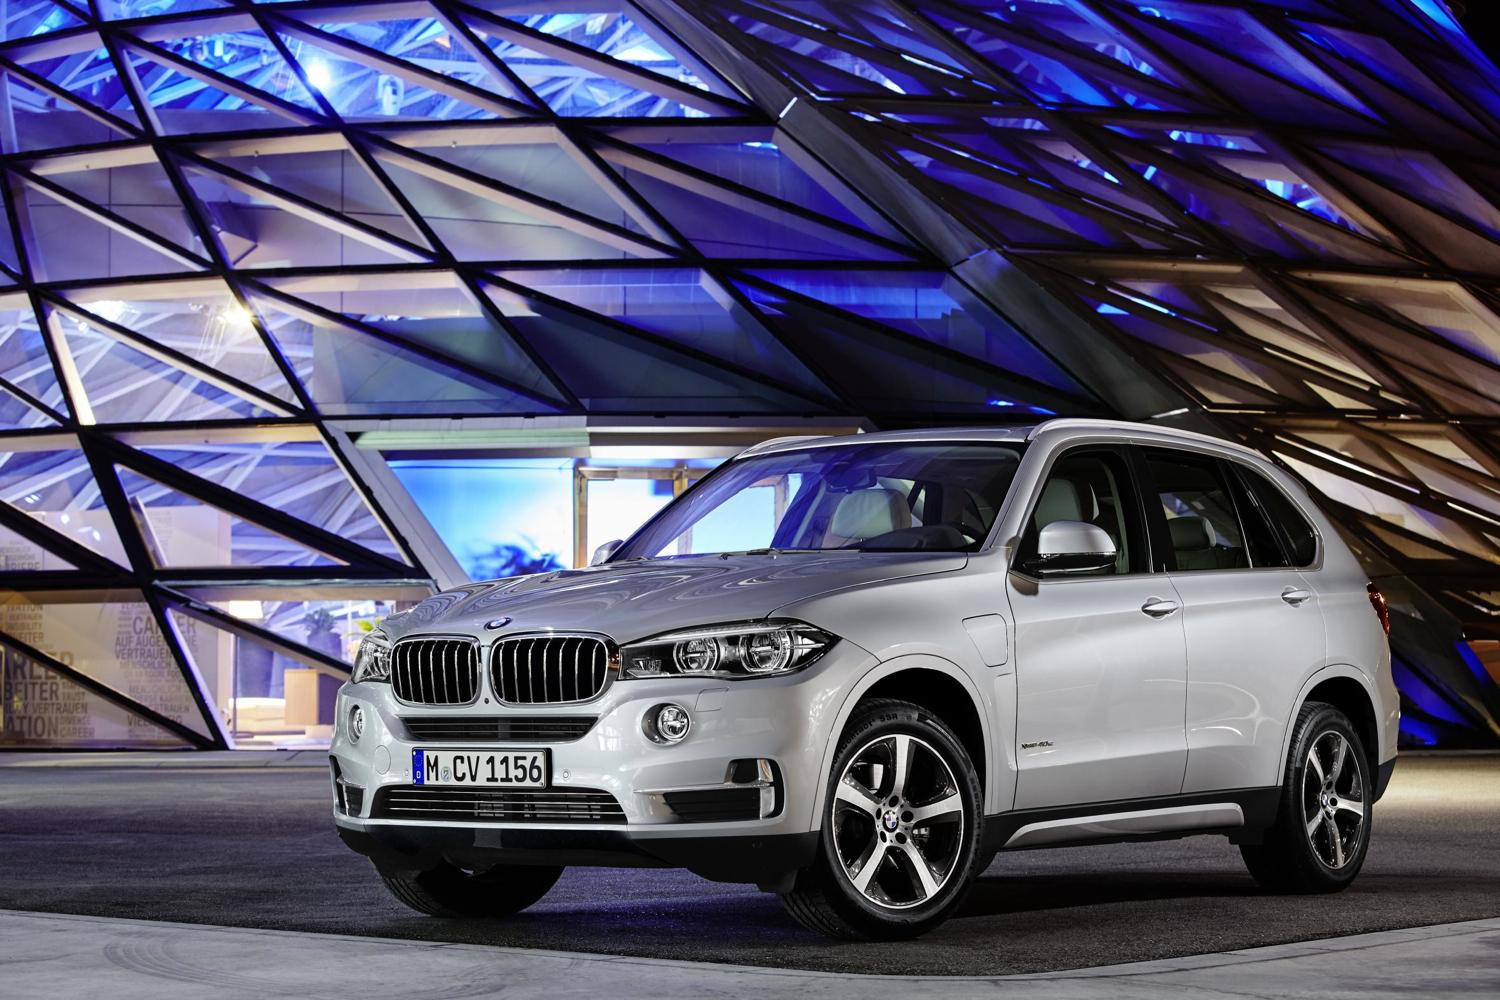 2016 BMW X5 xDrive 40e | Pictures, specs, and performance | Digital Trends